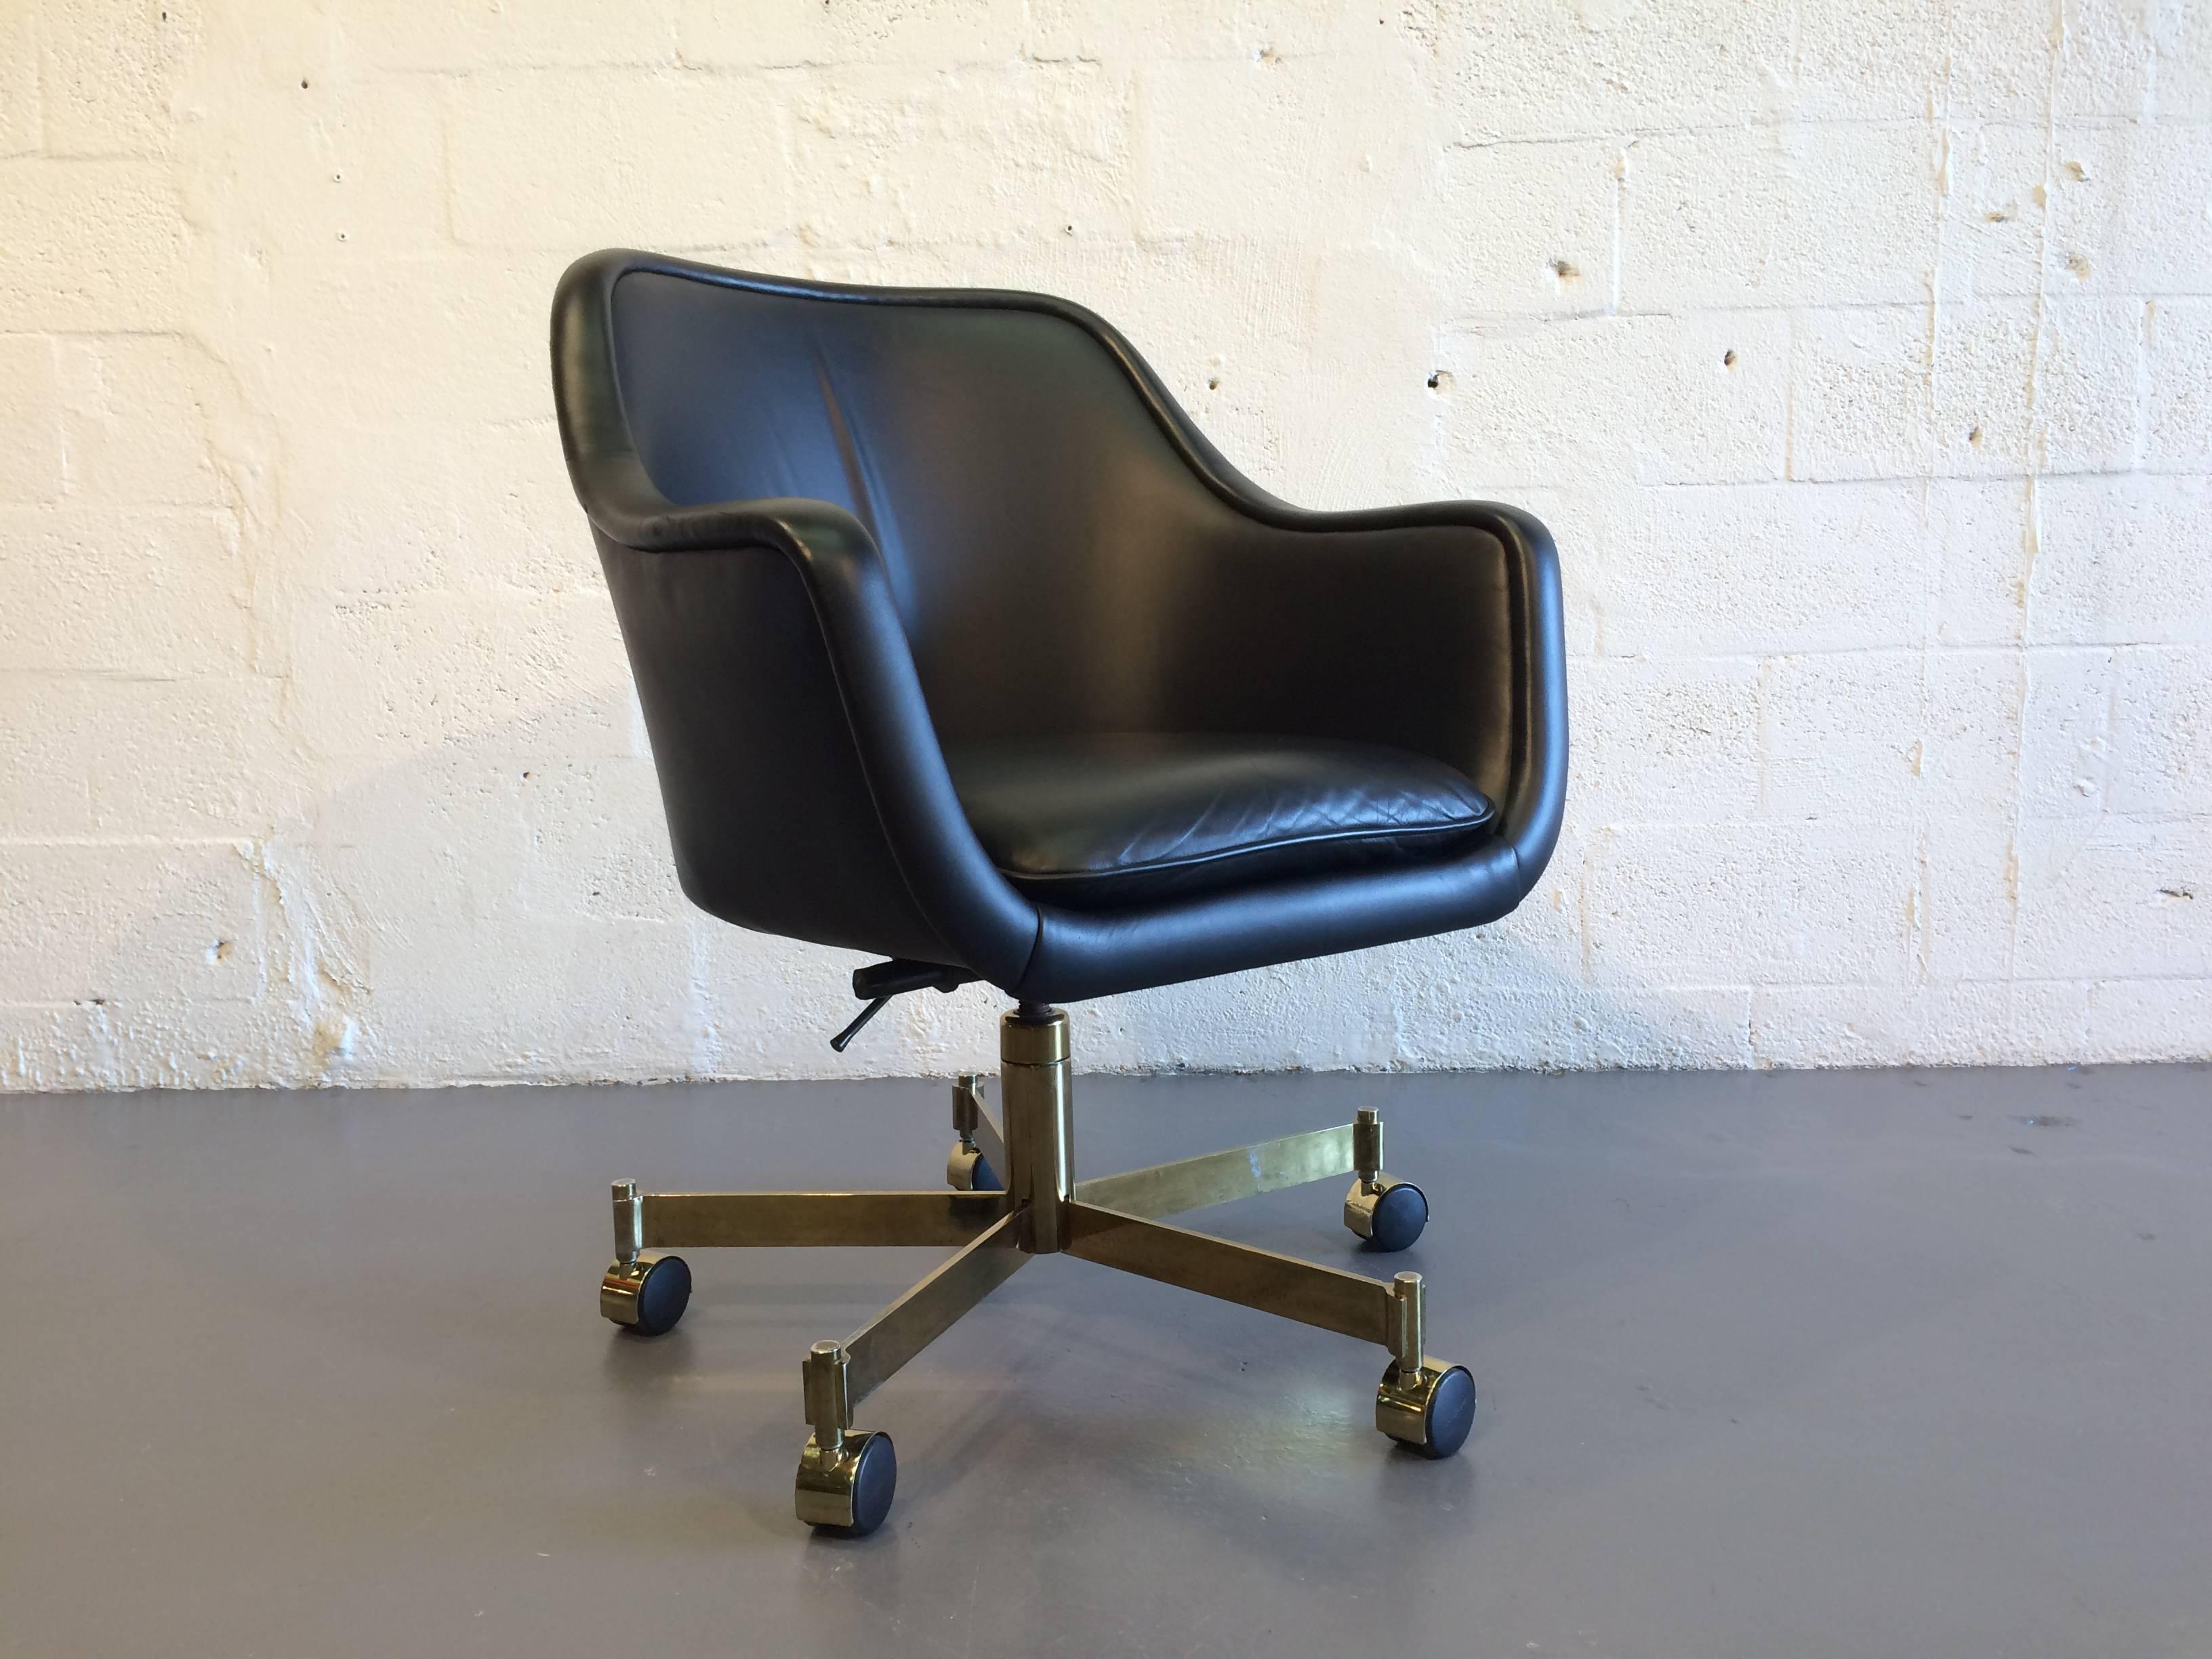 Desk chair by Ward Bennett. The base, tilts, swivels, and has an adjustable height.